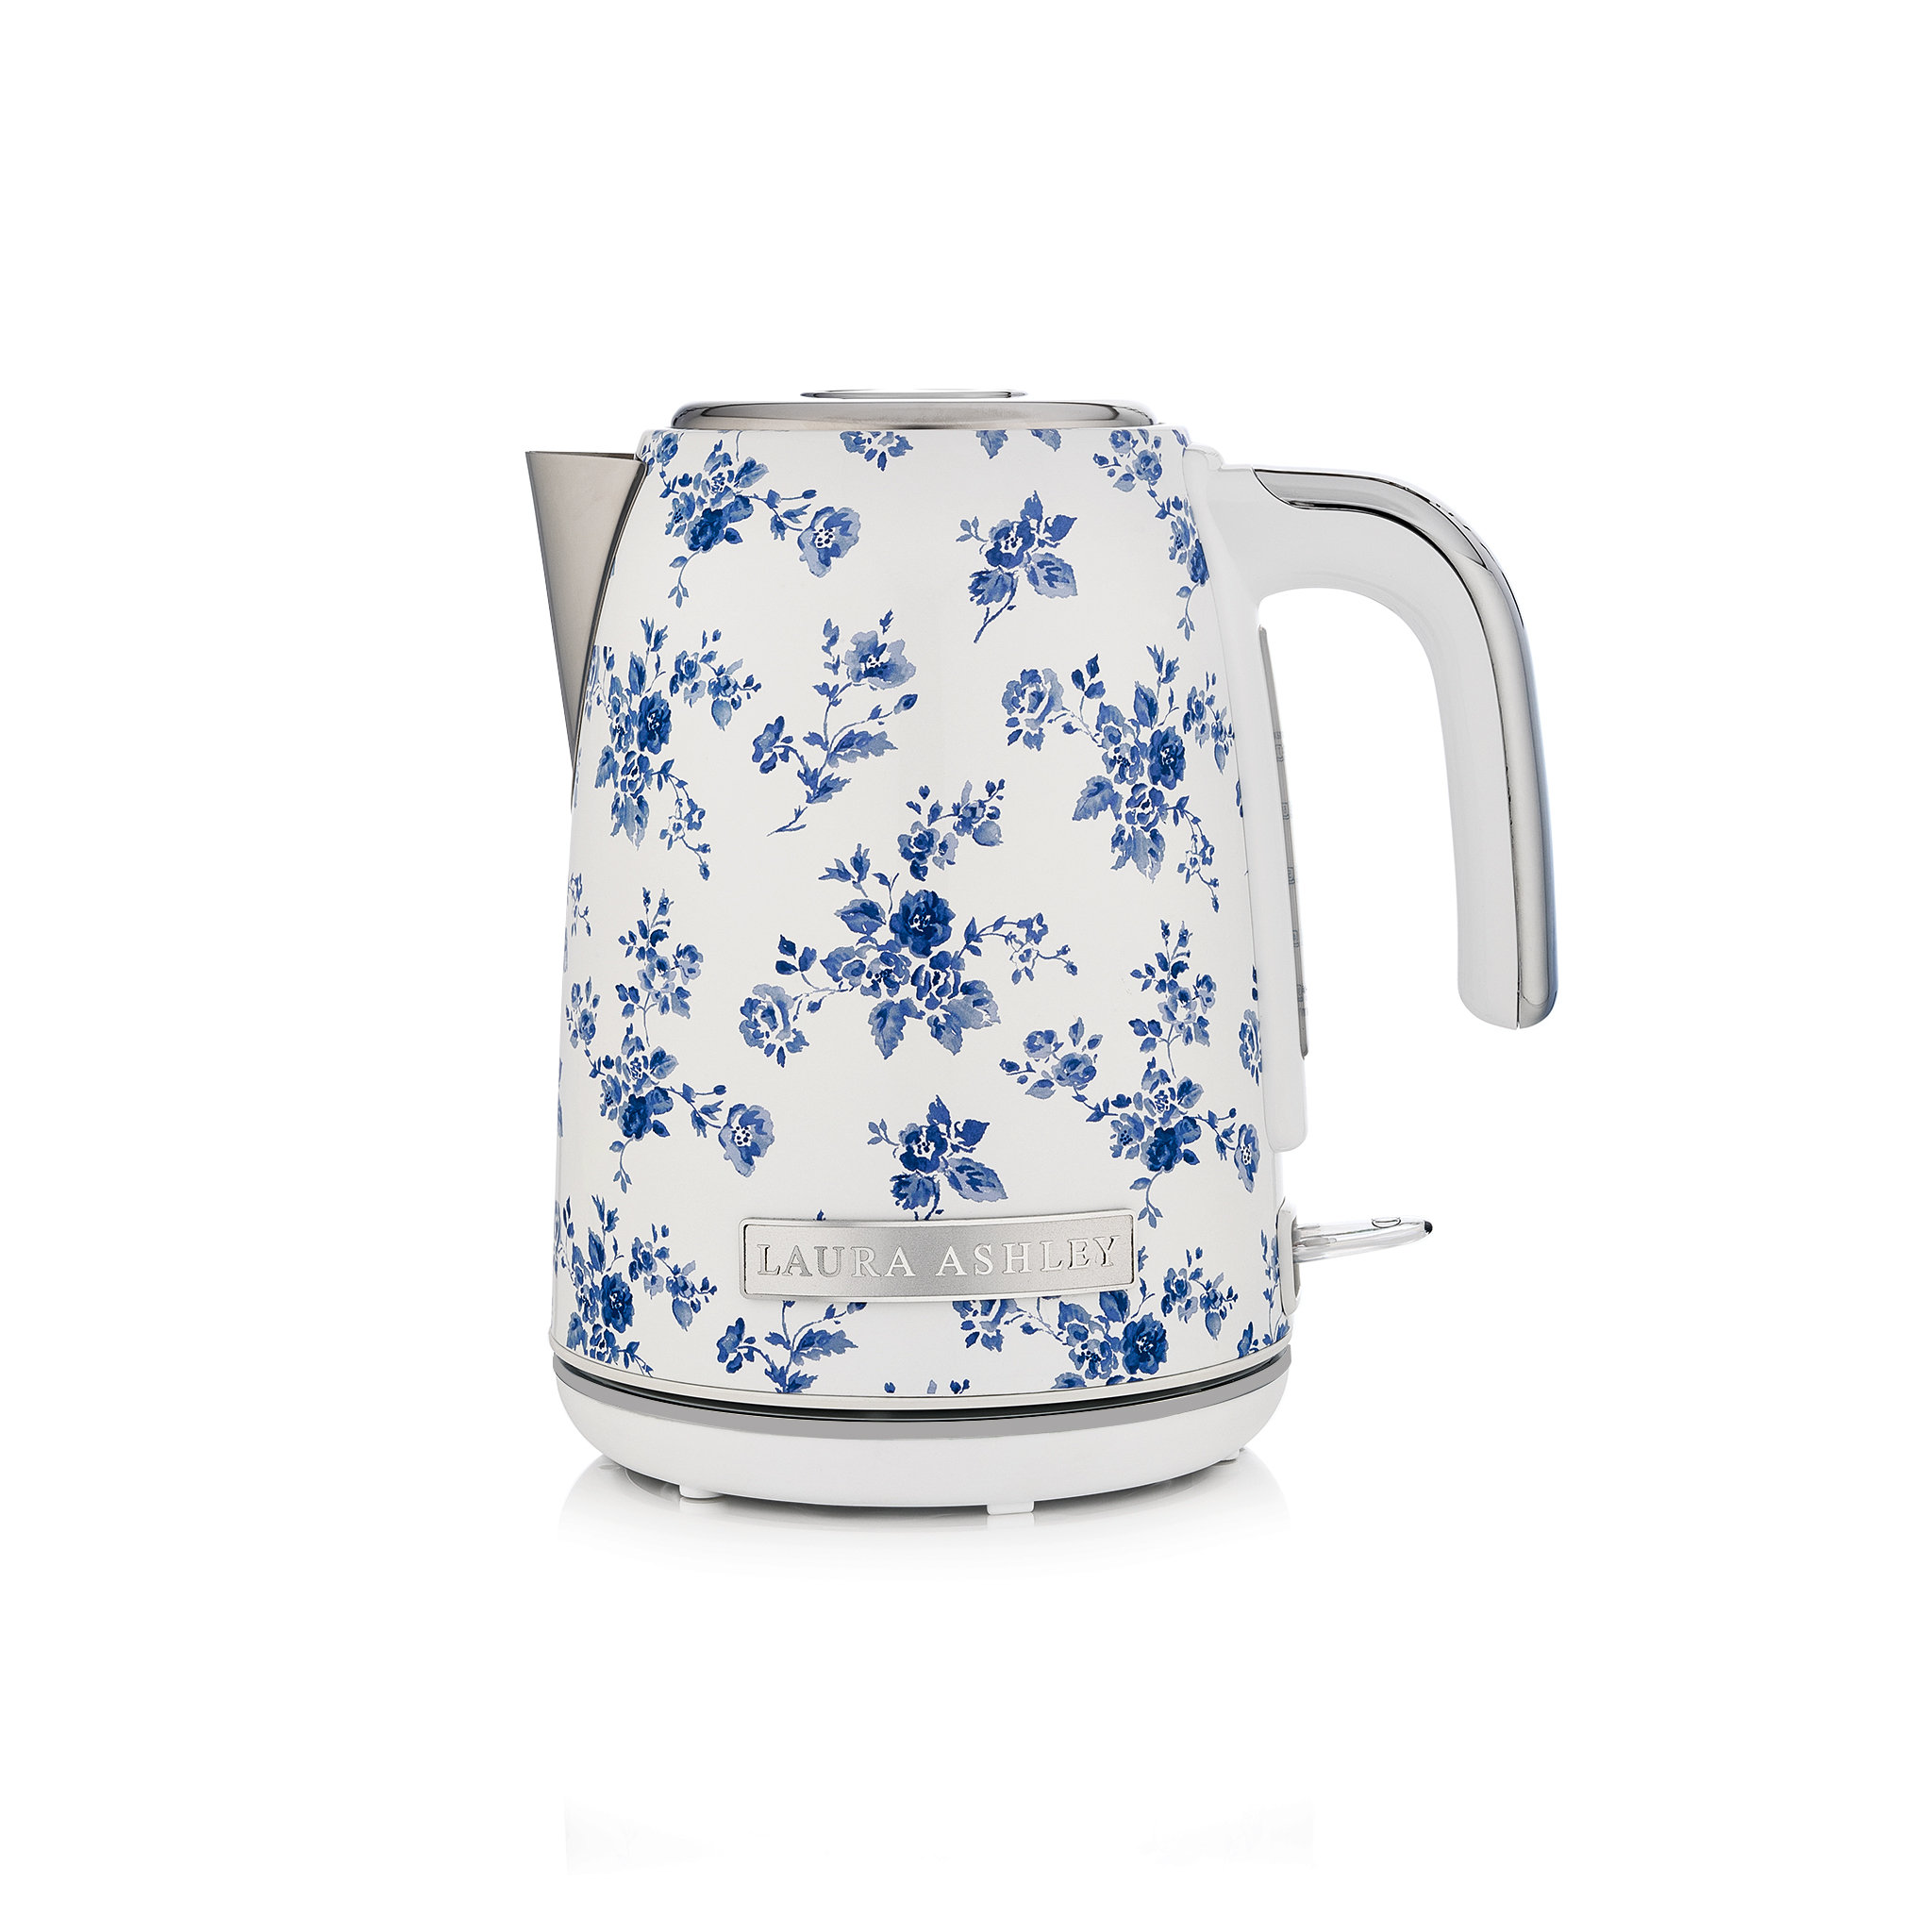 Laura Ashley 10 Cup Stainless Steel Stovetop Tea Kettle